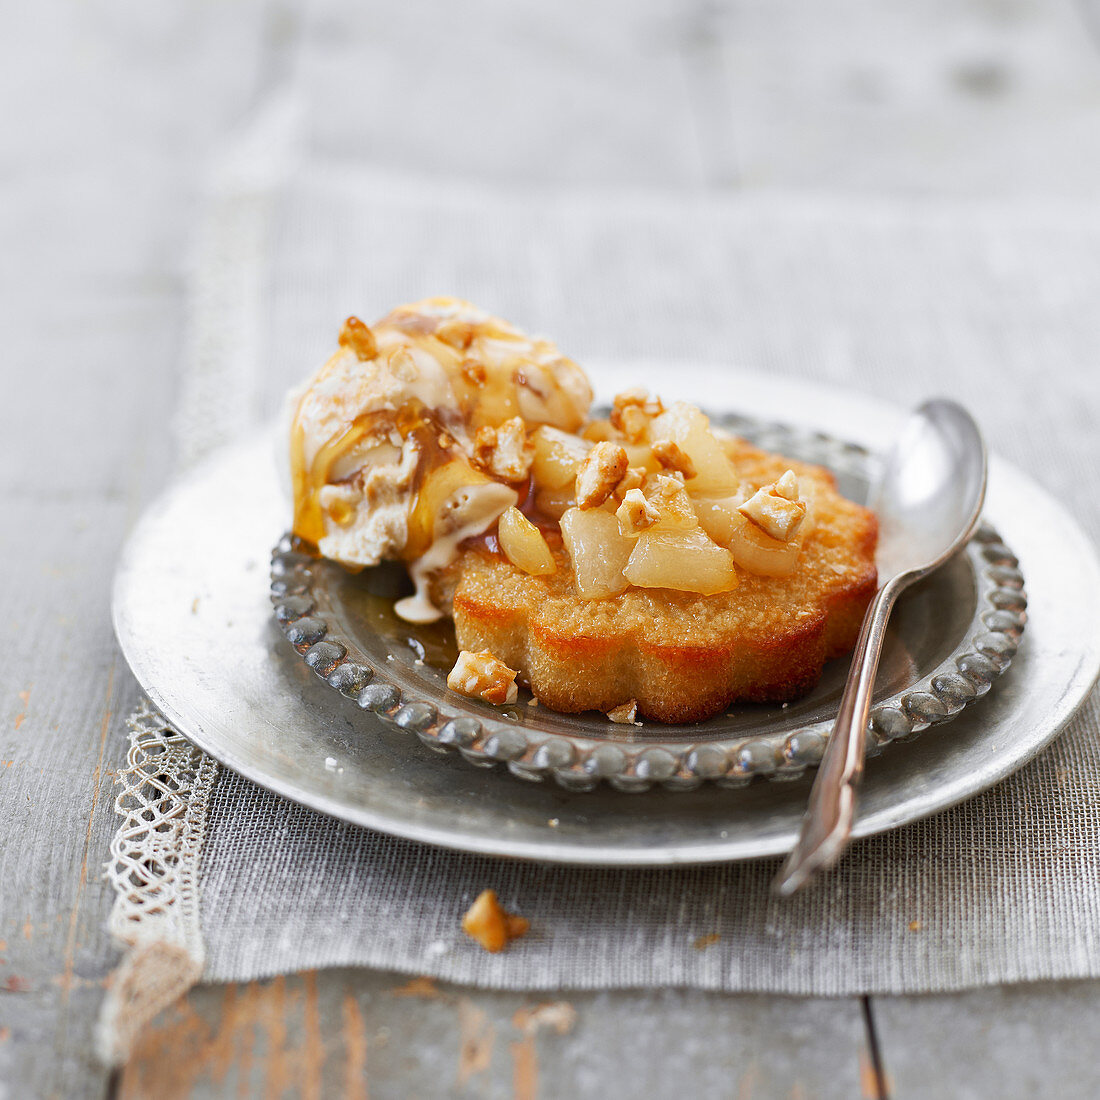 Moelleux-style pear cake with caramel sauce